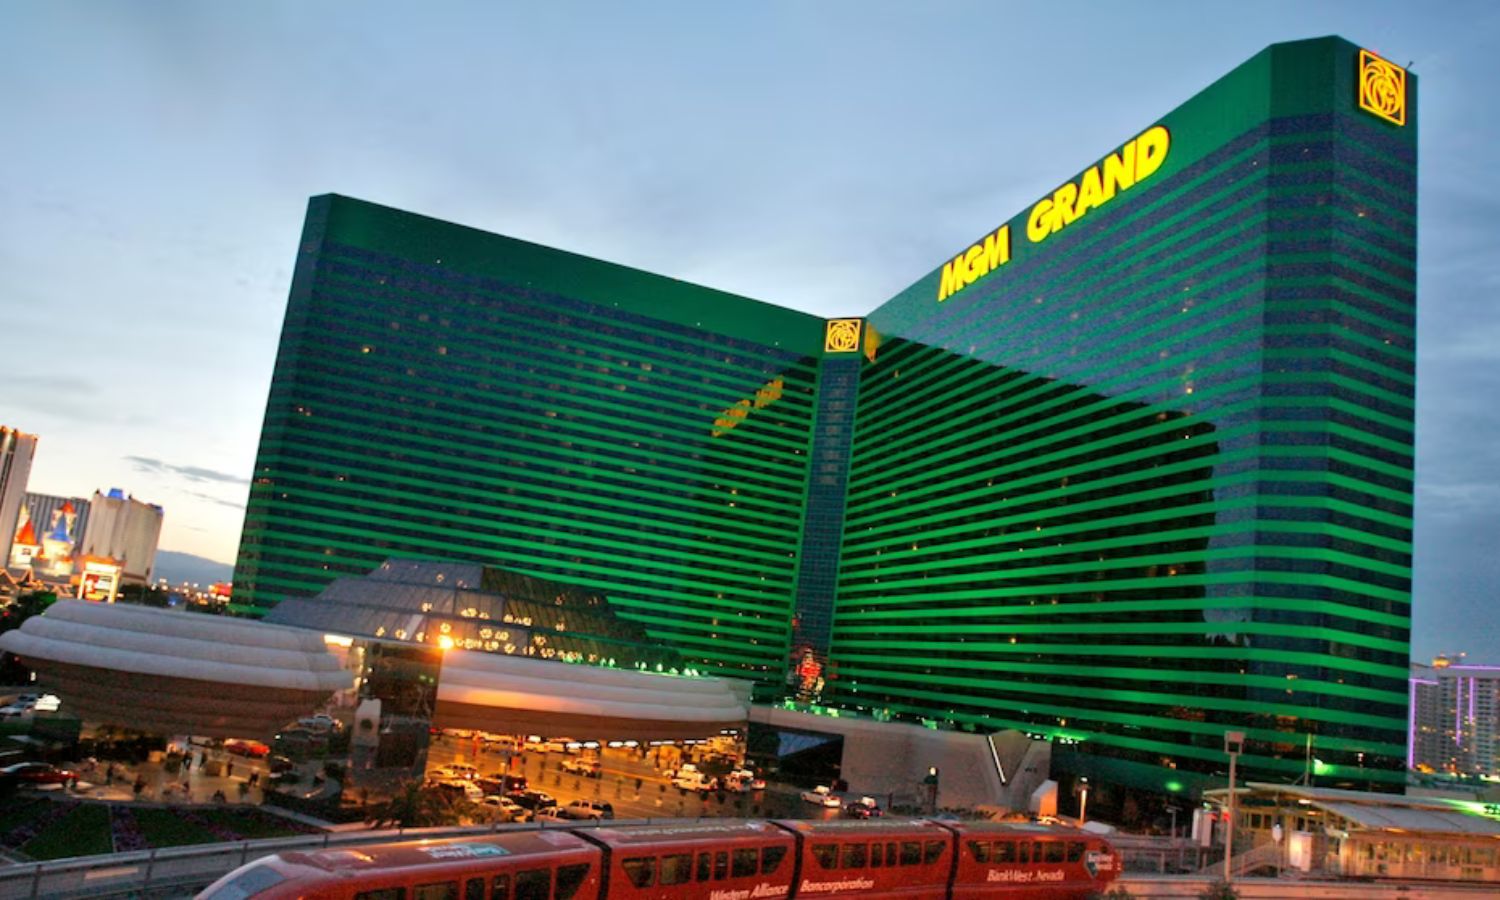 Cyberattack shuts down IT systems at MGM hotels in Las Vegas